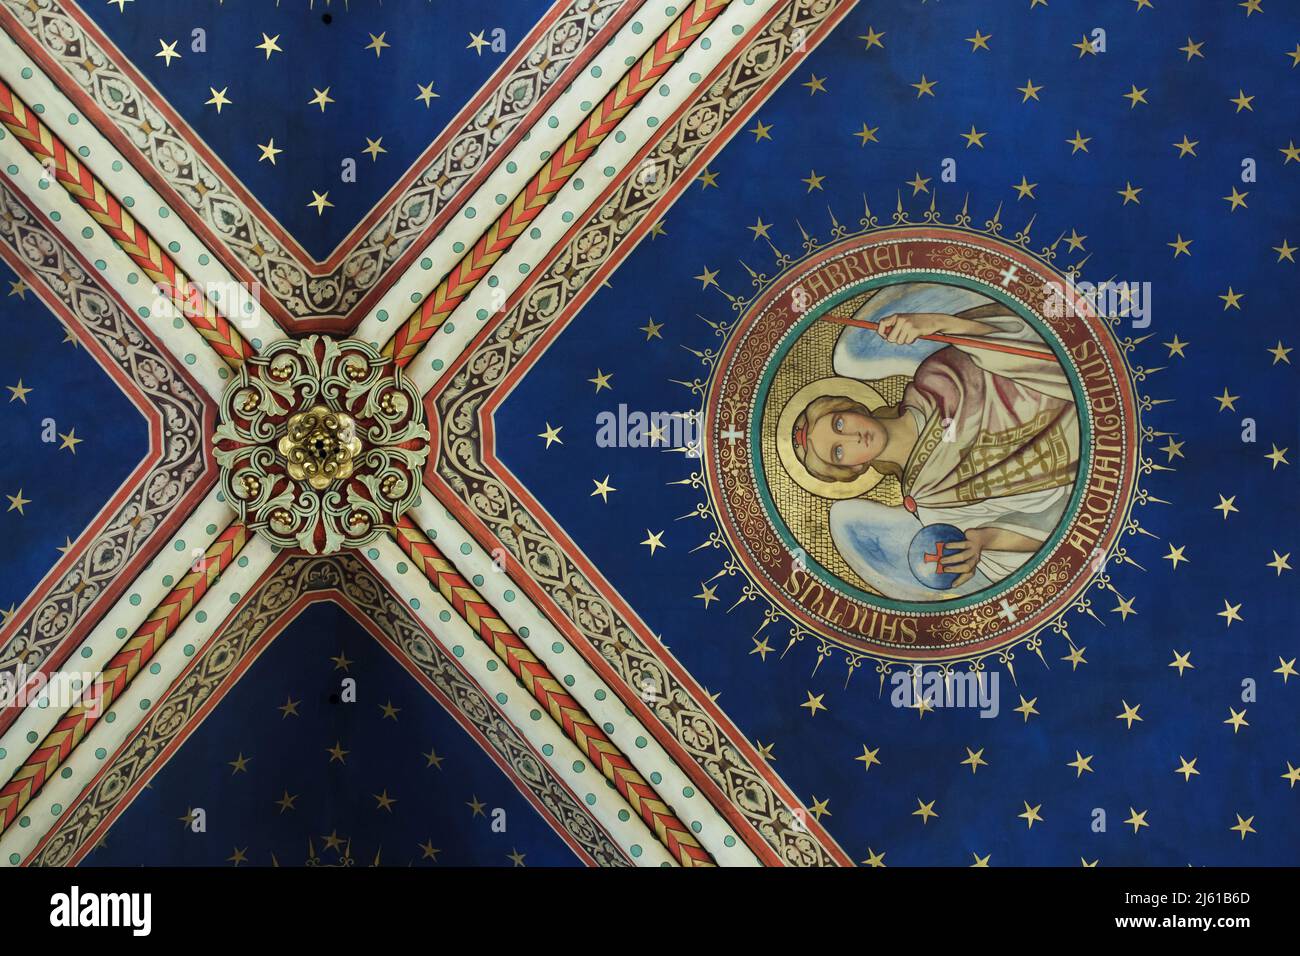 Archangel Gabriel depicted in the ceiling painting in the Church of Saint-Germain-des-Prés in Paris, France. Stock Photo